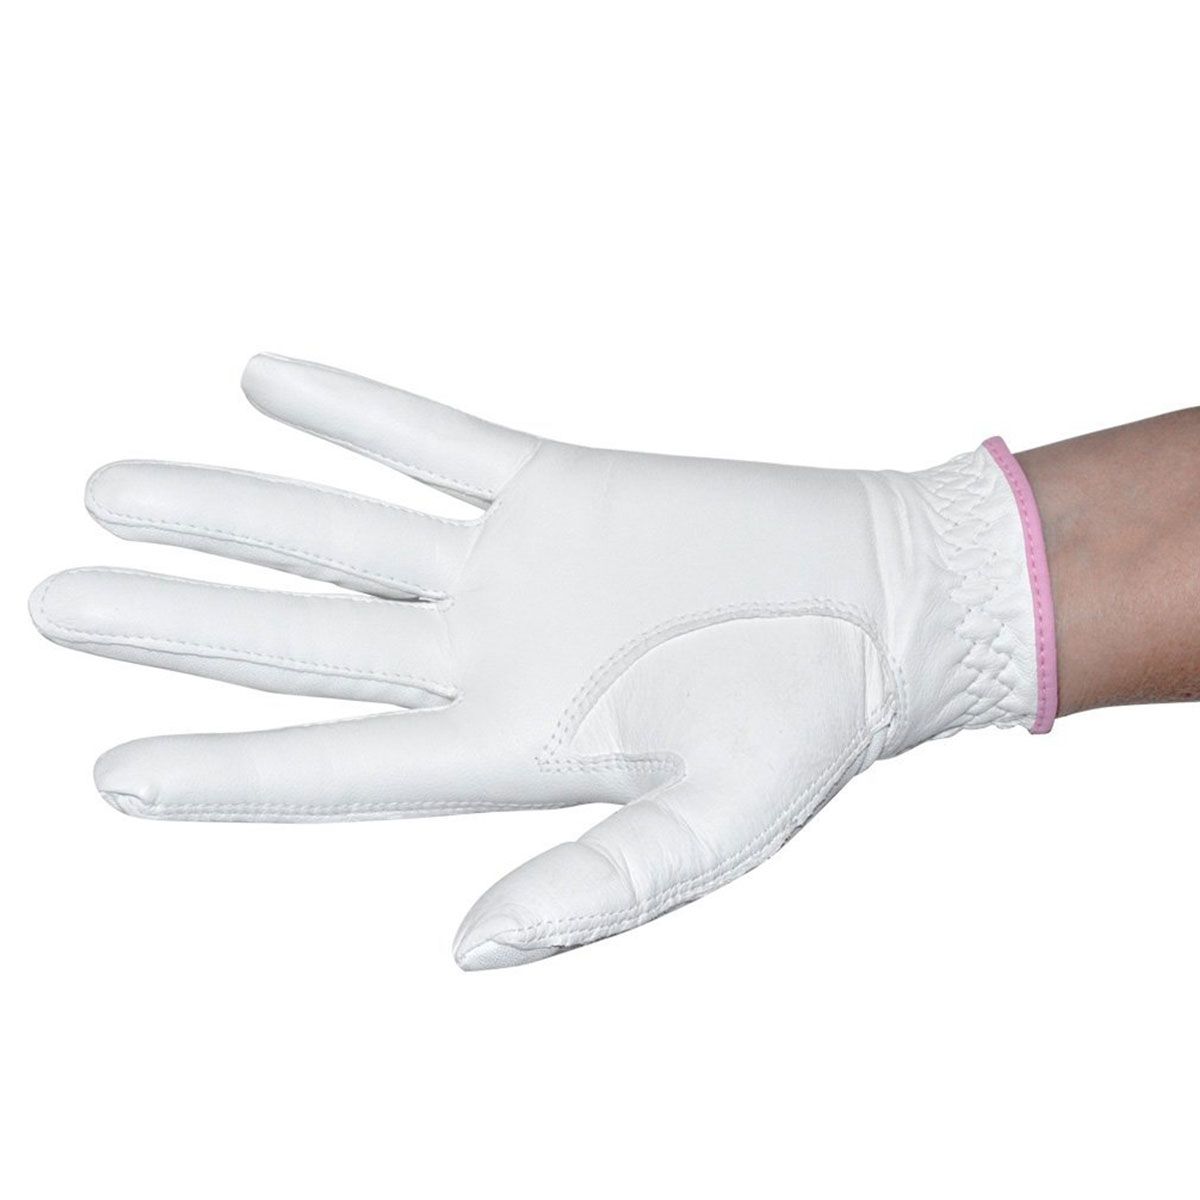 open palm view of an Intech Women's Cabretta Leather Golf Glove with a person wearing it on their left hand